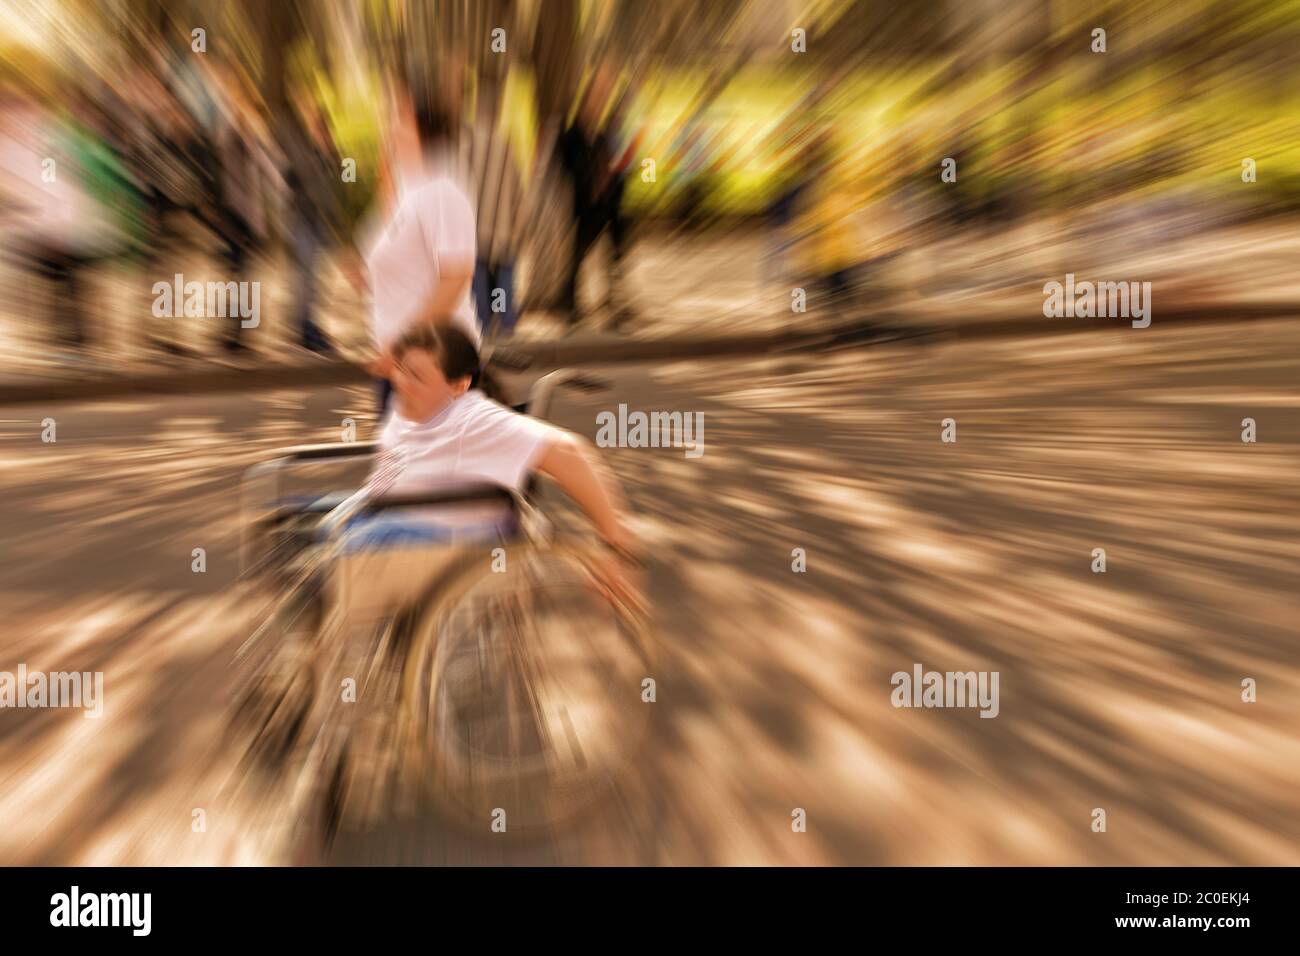 Abstract background. Marathon with the participation of disabled persons in wheelchair - motion blurred image. Stock Photo